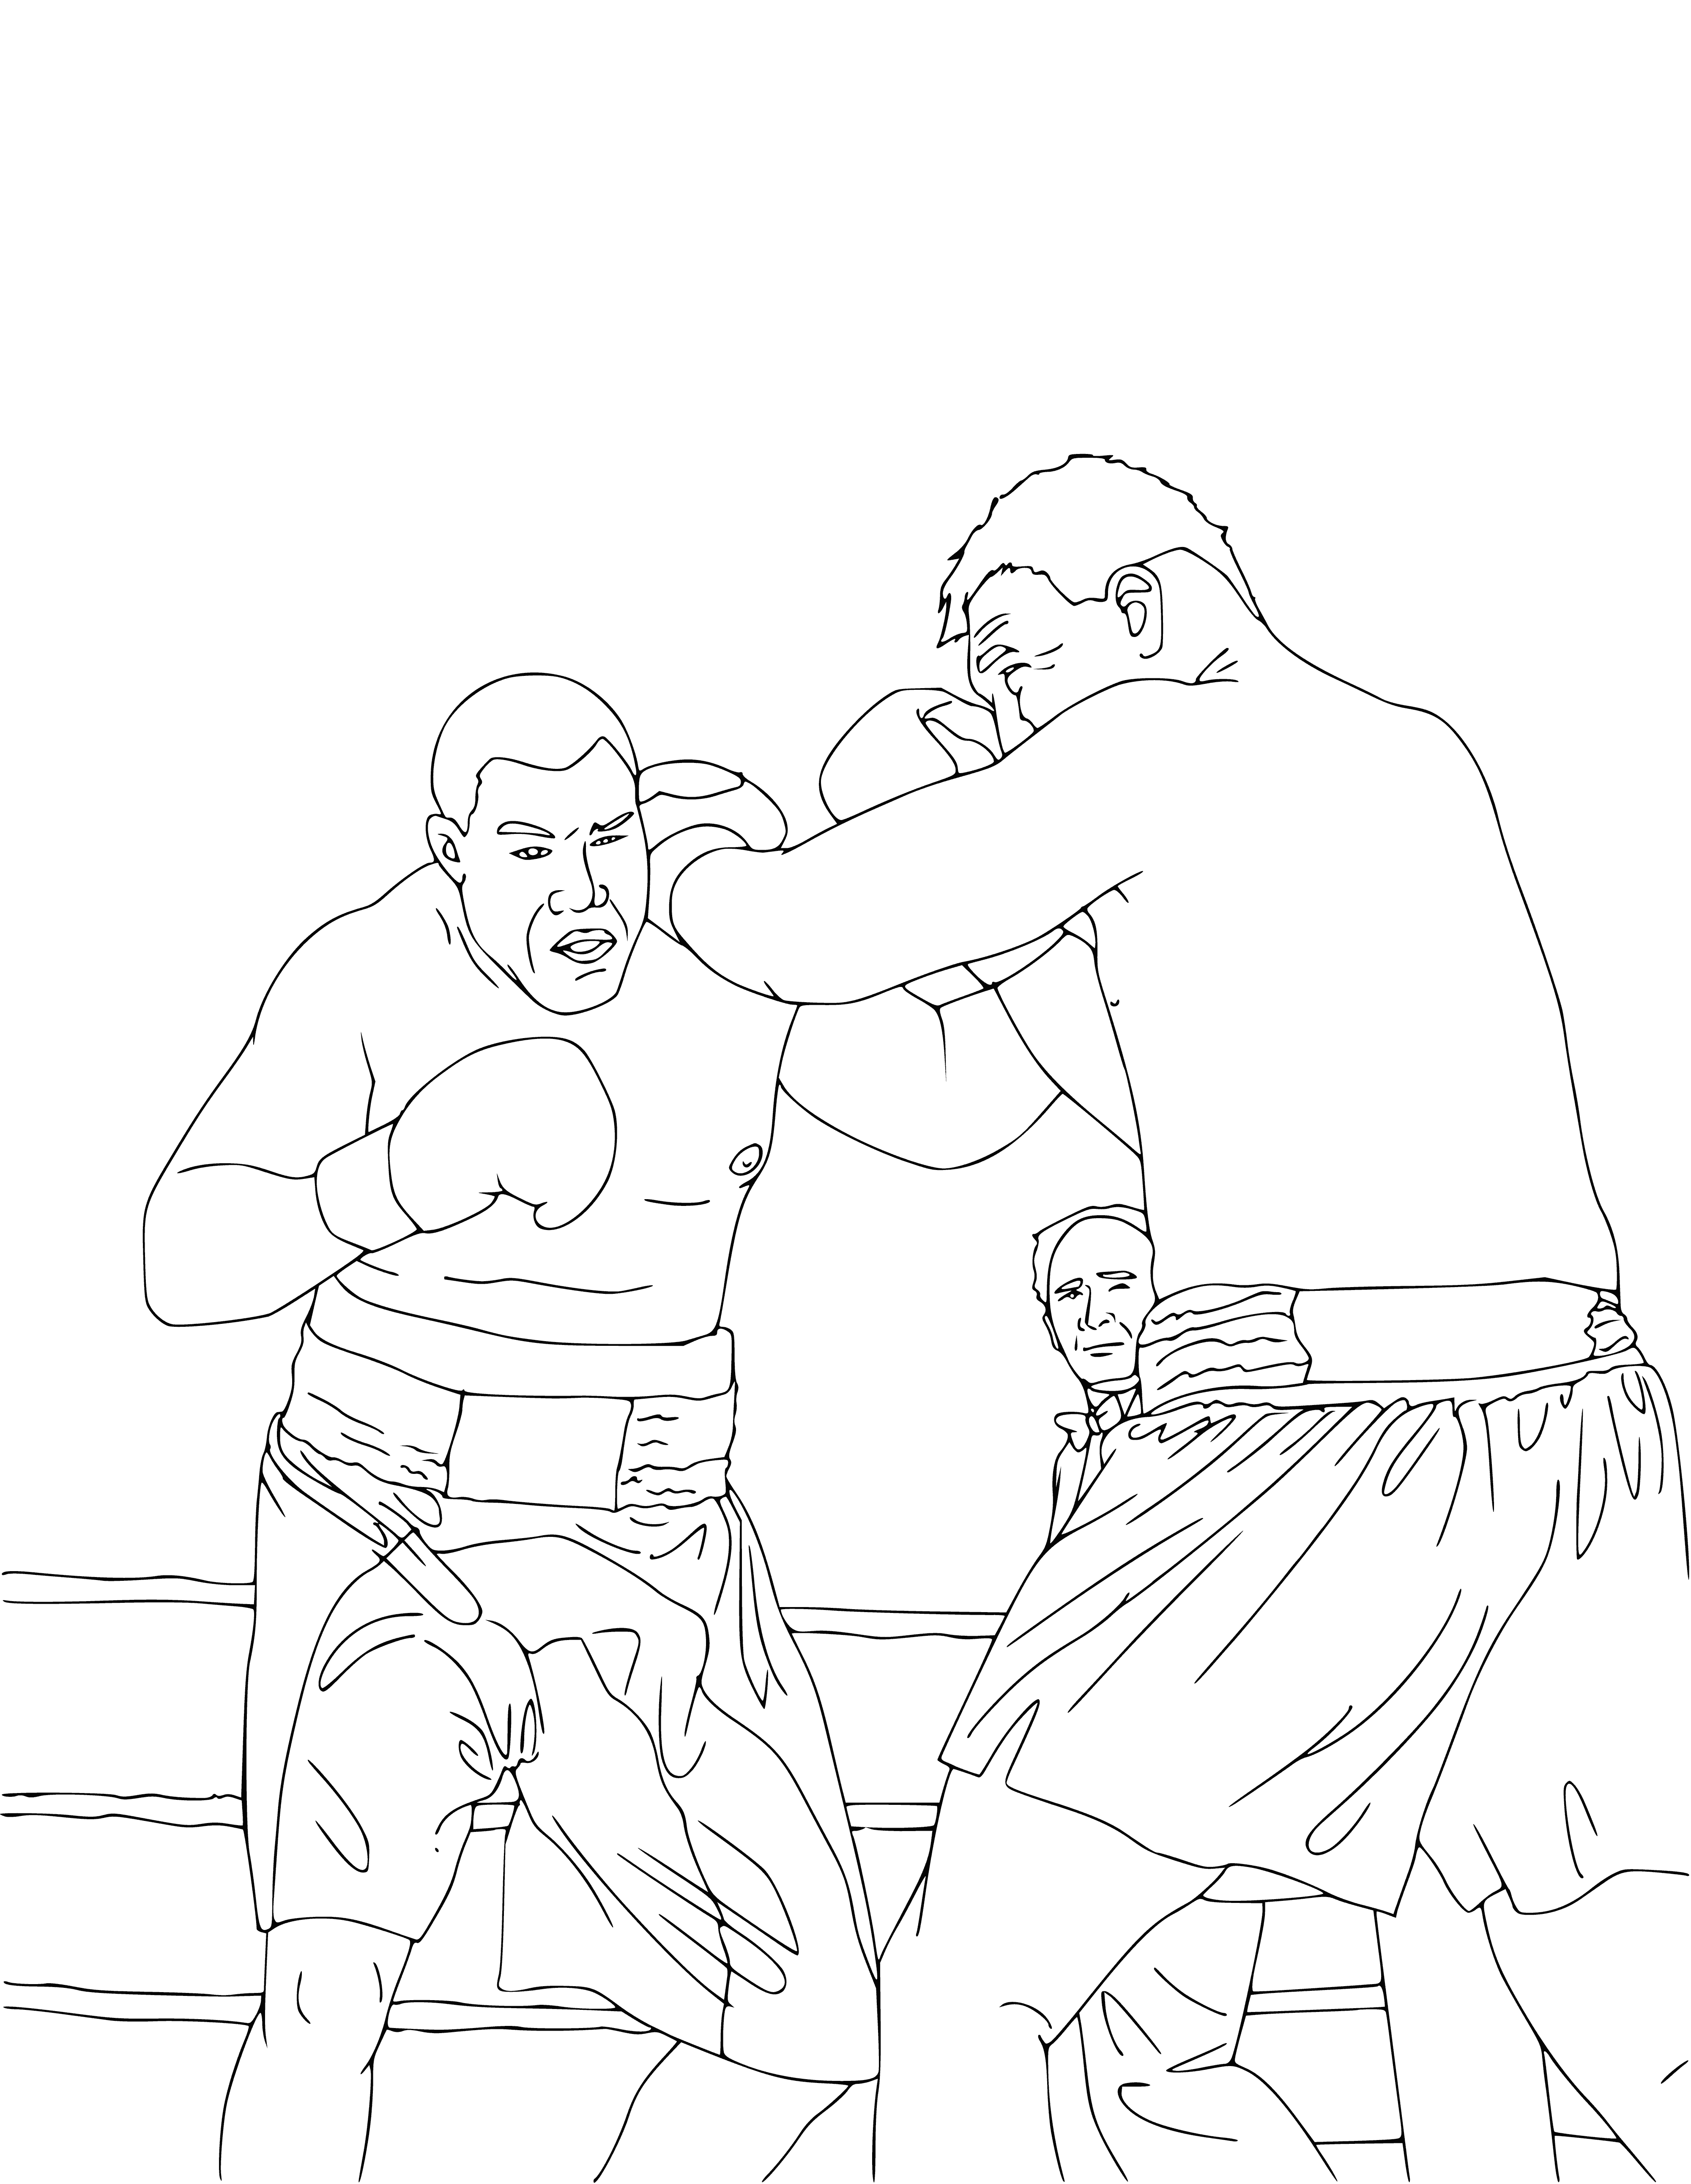 coloring page: Man & woman boxing in ring. Woman punching man, he blocking punches.